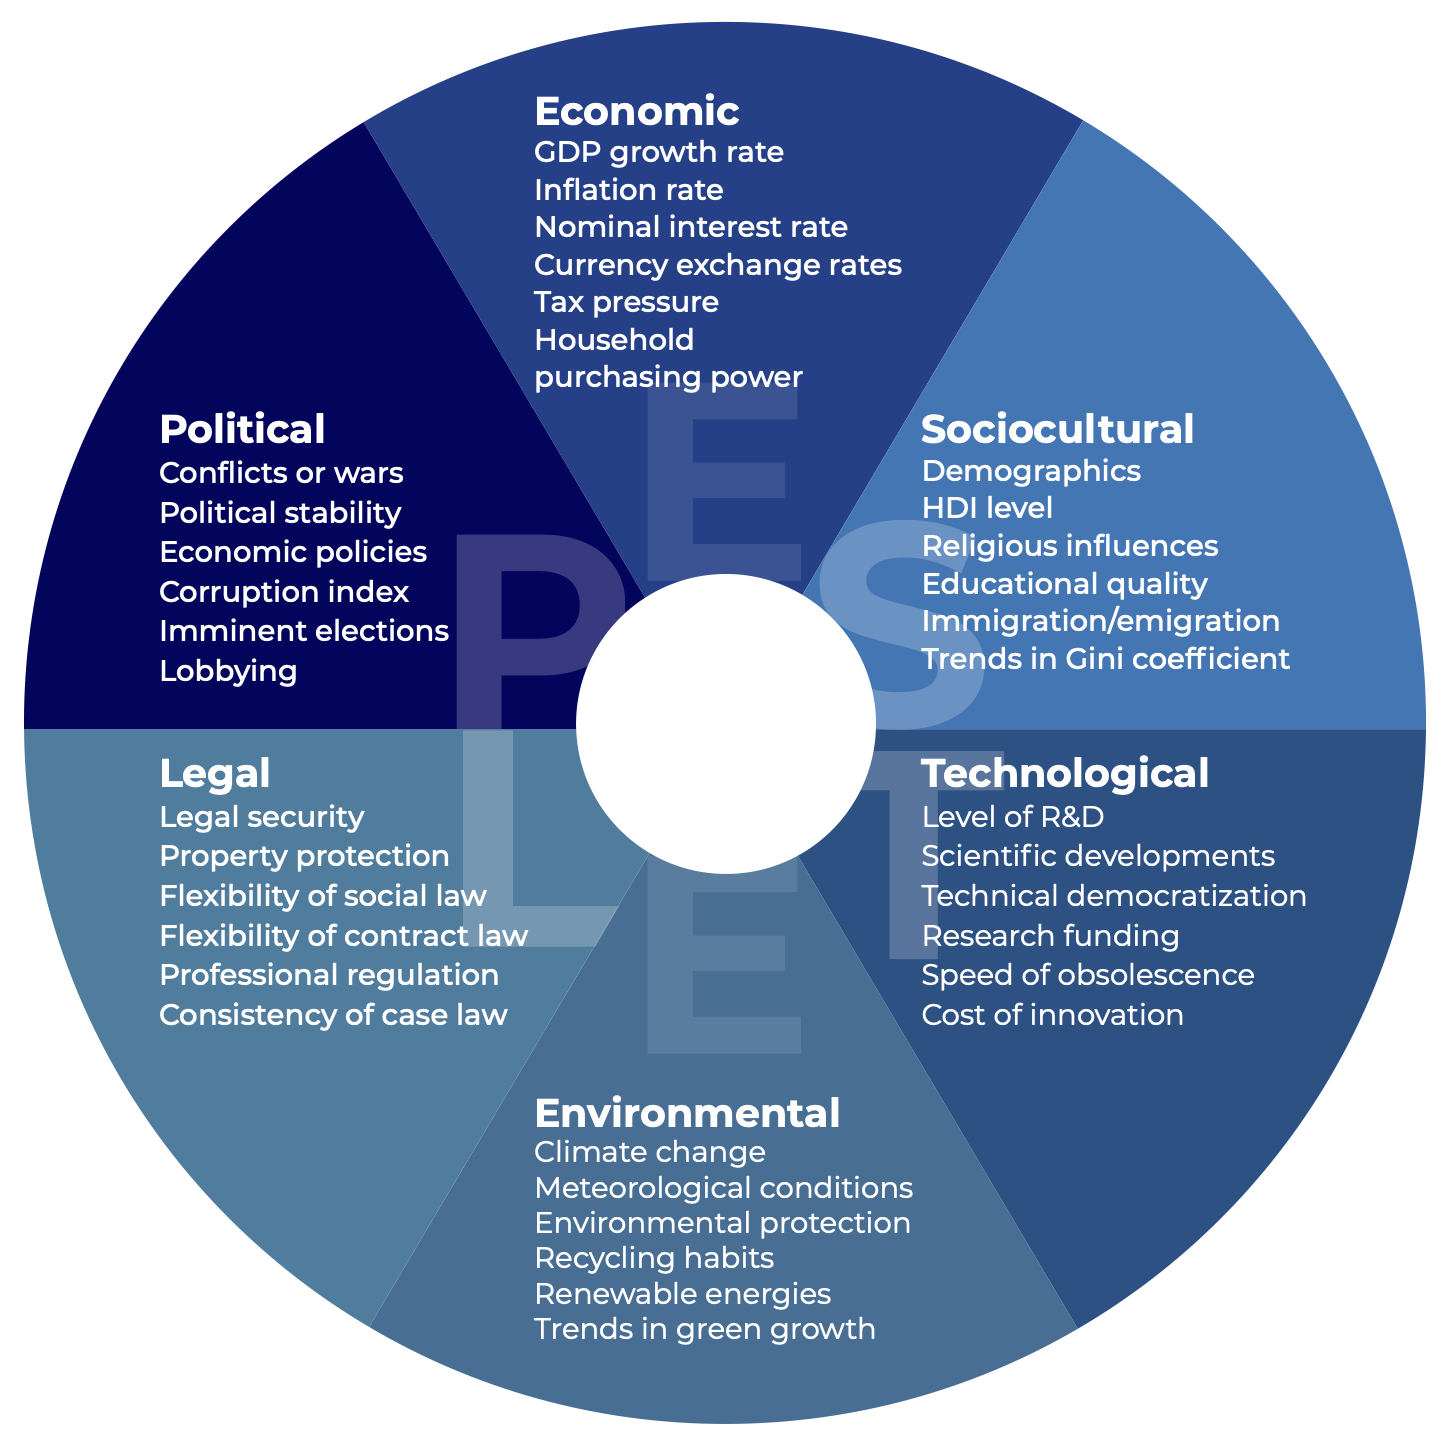 Diagram of the PESTEL model in the form of a circle divided into 5 parts: economic, sociocultural, technological, environmental, legal and political.